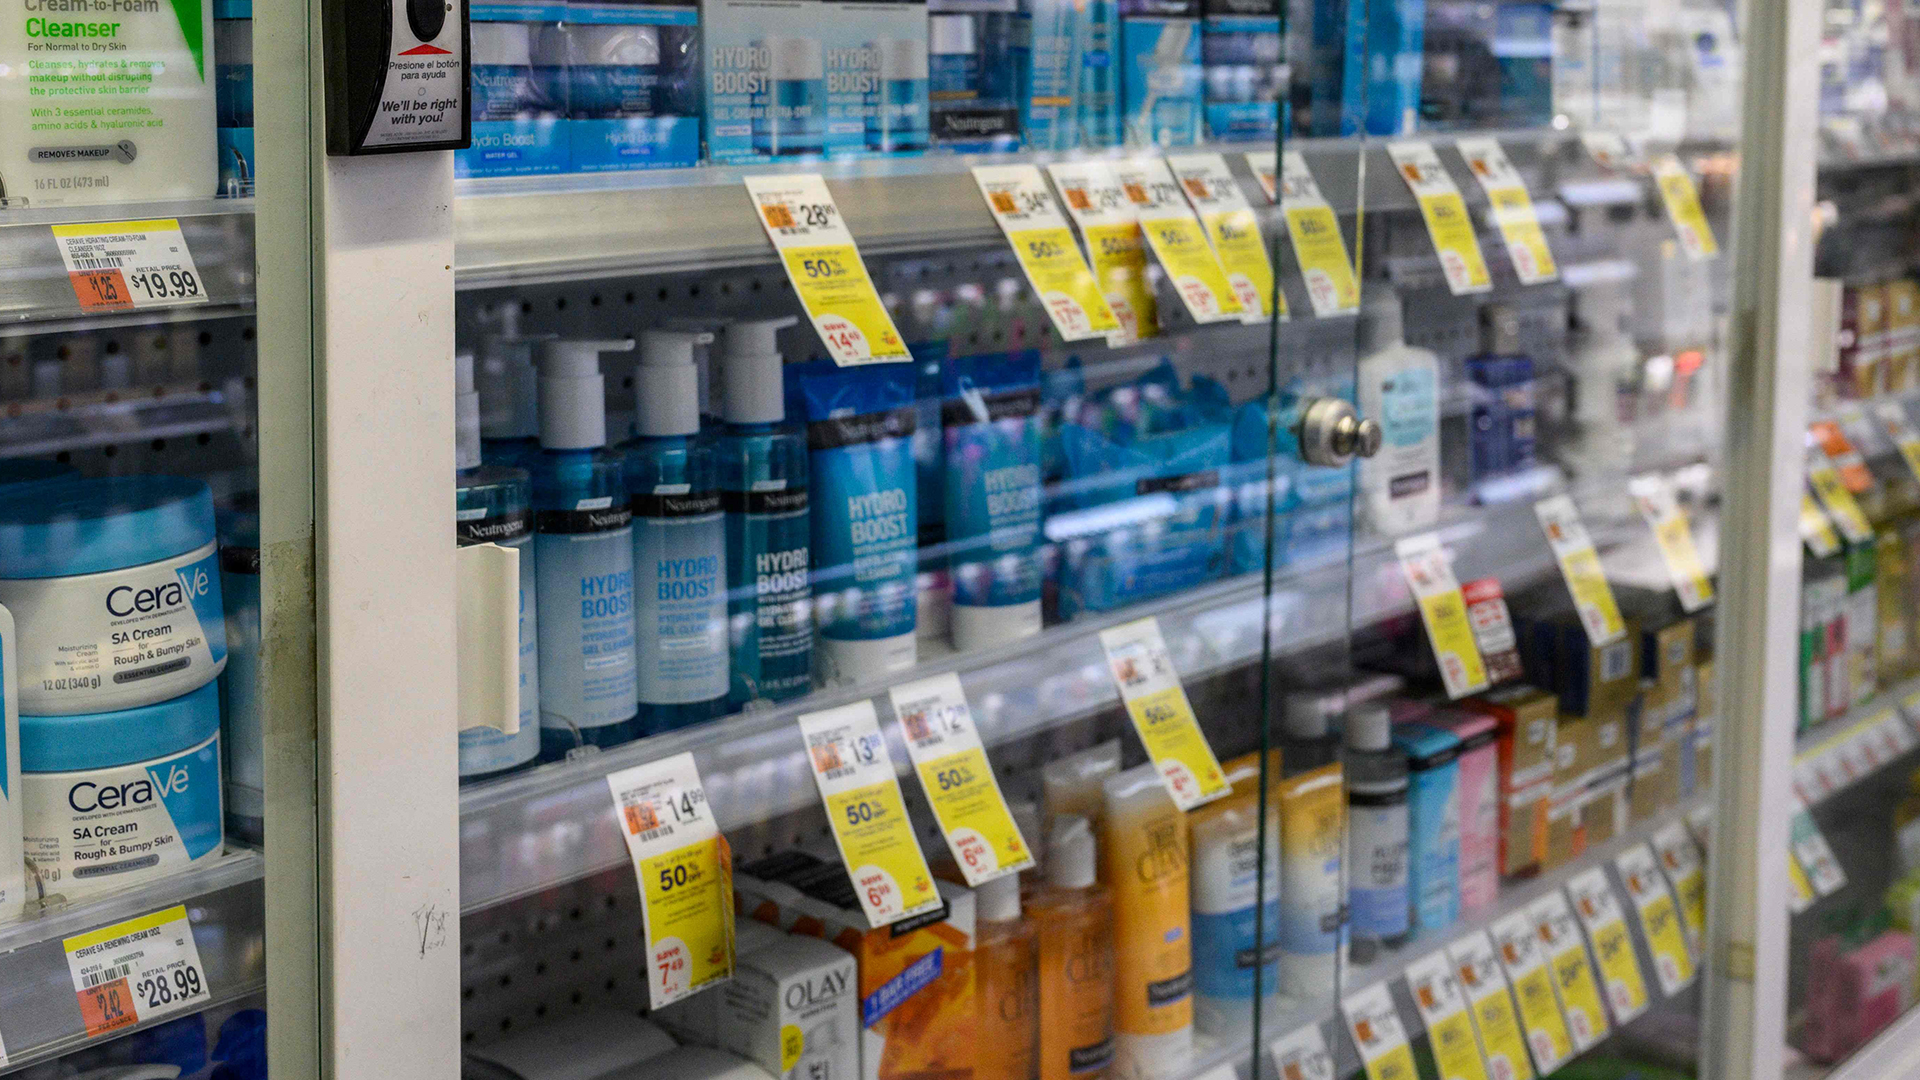 ‘It’s insanity,’ says CVS shopper finding single tube of toothpaste locked up – as multiple stores ‘1 step from closing’ [Video]